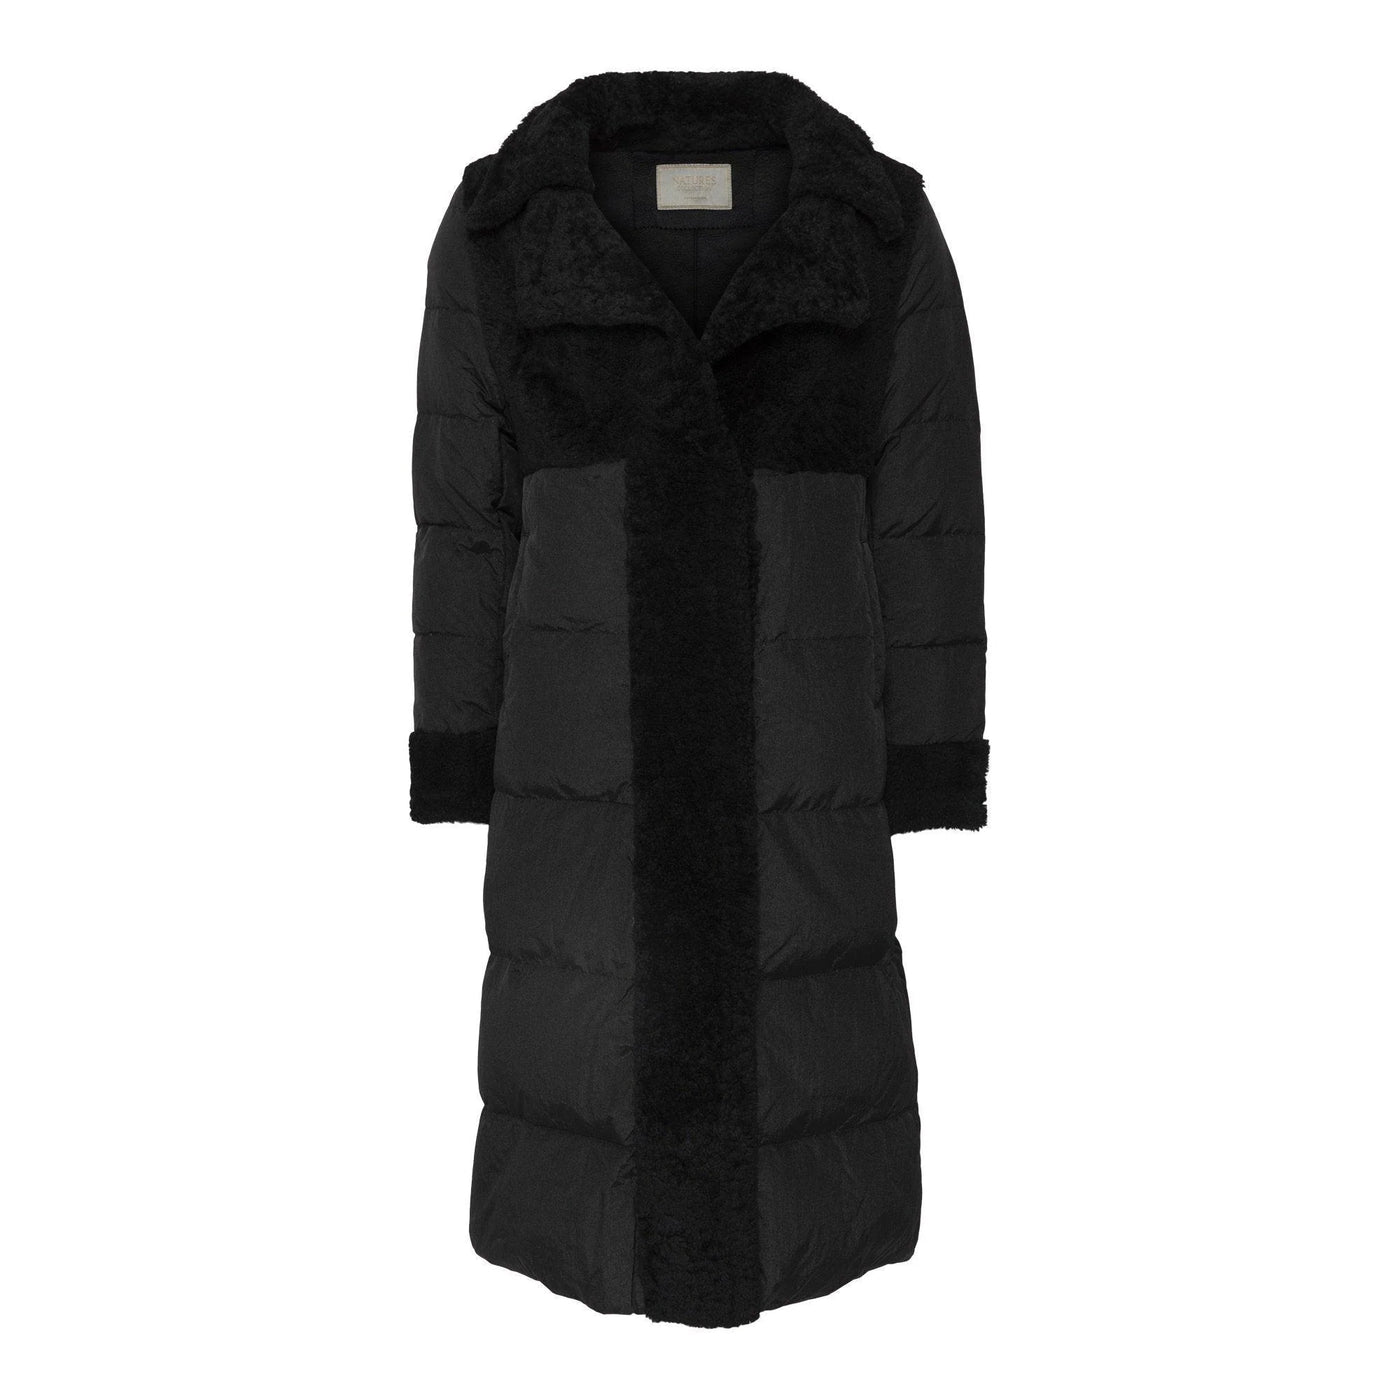 COAT SHEEPSKIN GOOSE DOWN BLACK (Available in 2 Sizes)